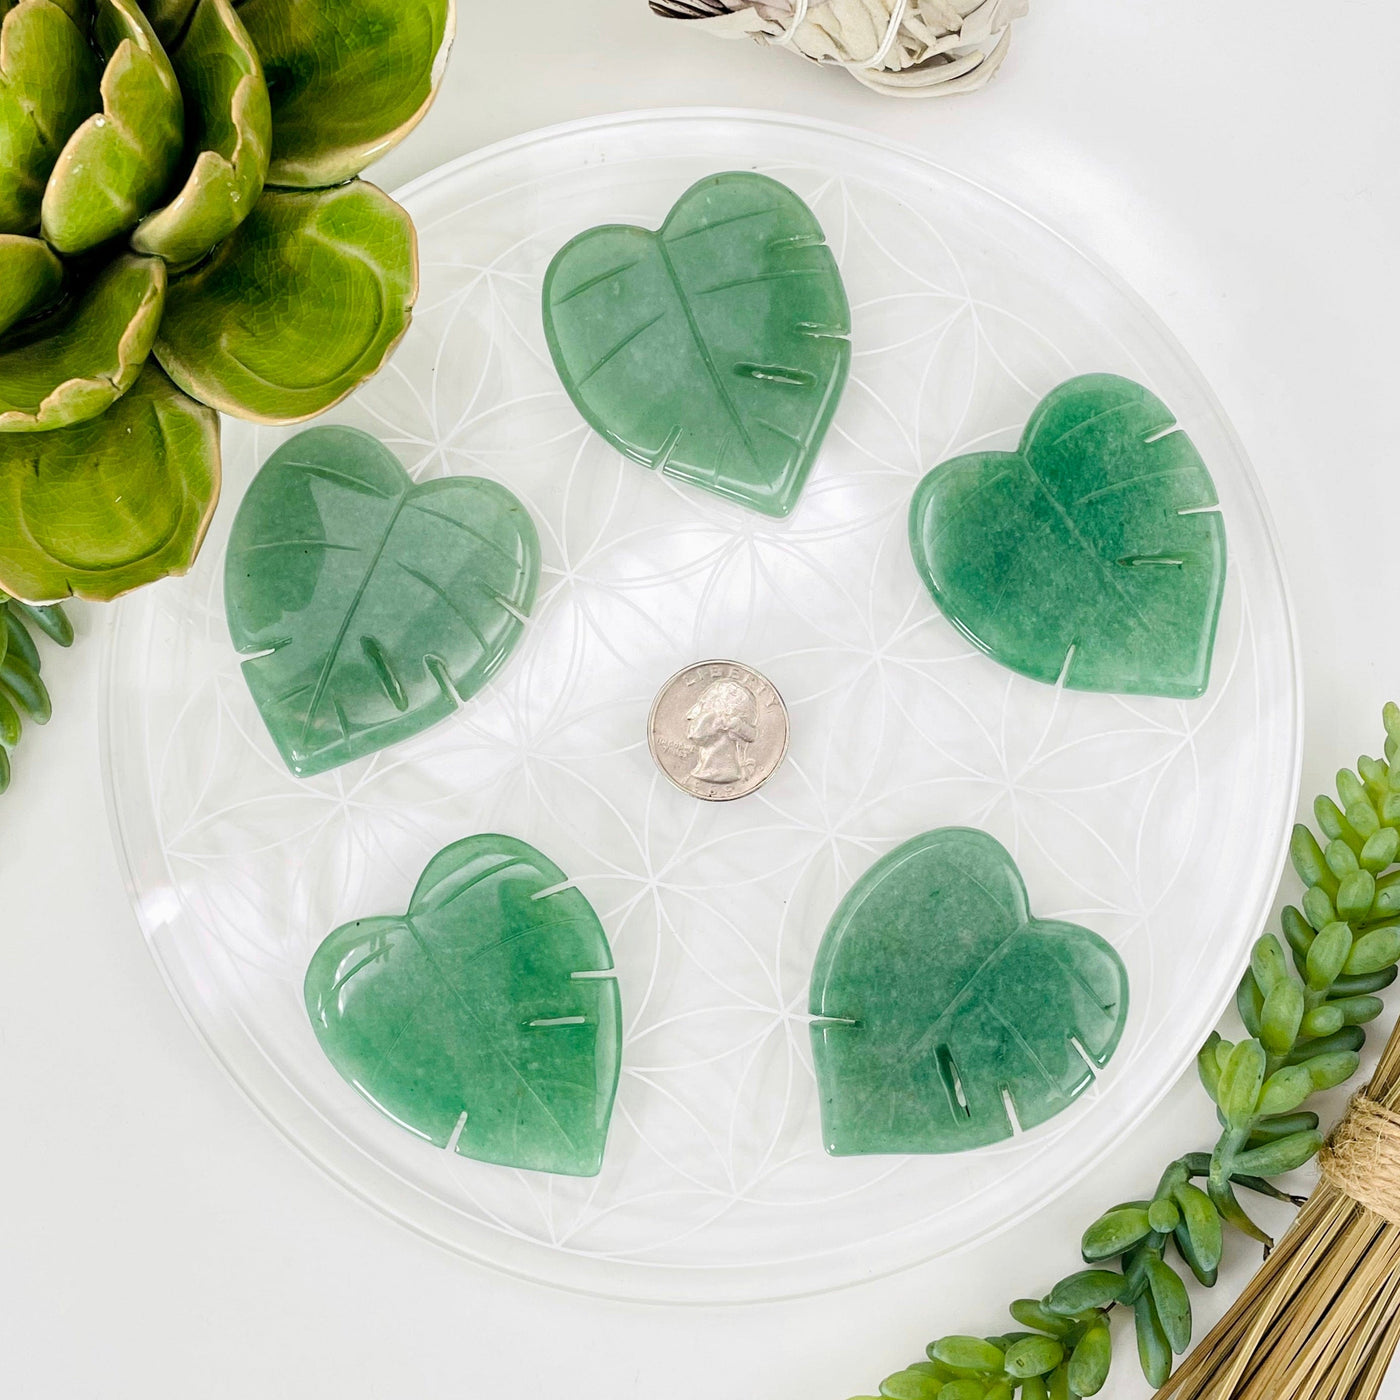 overhead view of five aventurine leaves on display with a quarter for size reference